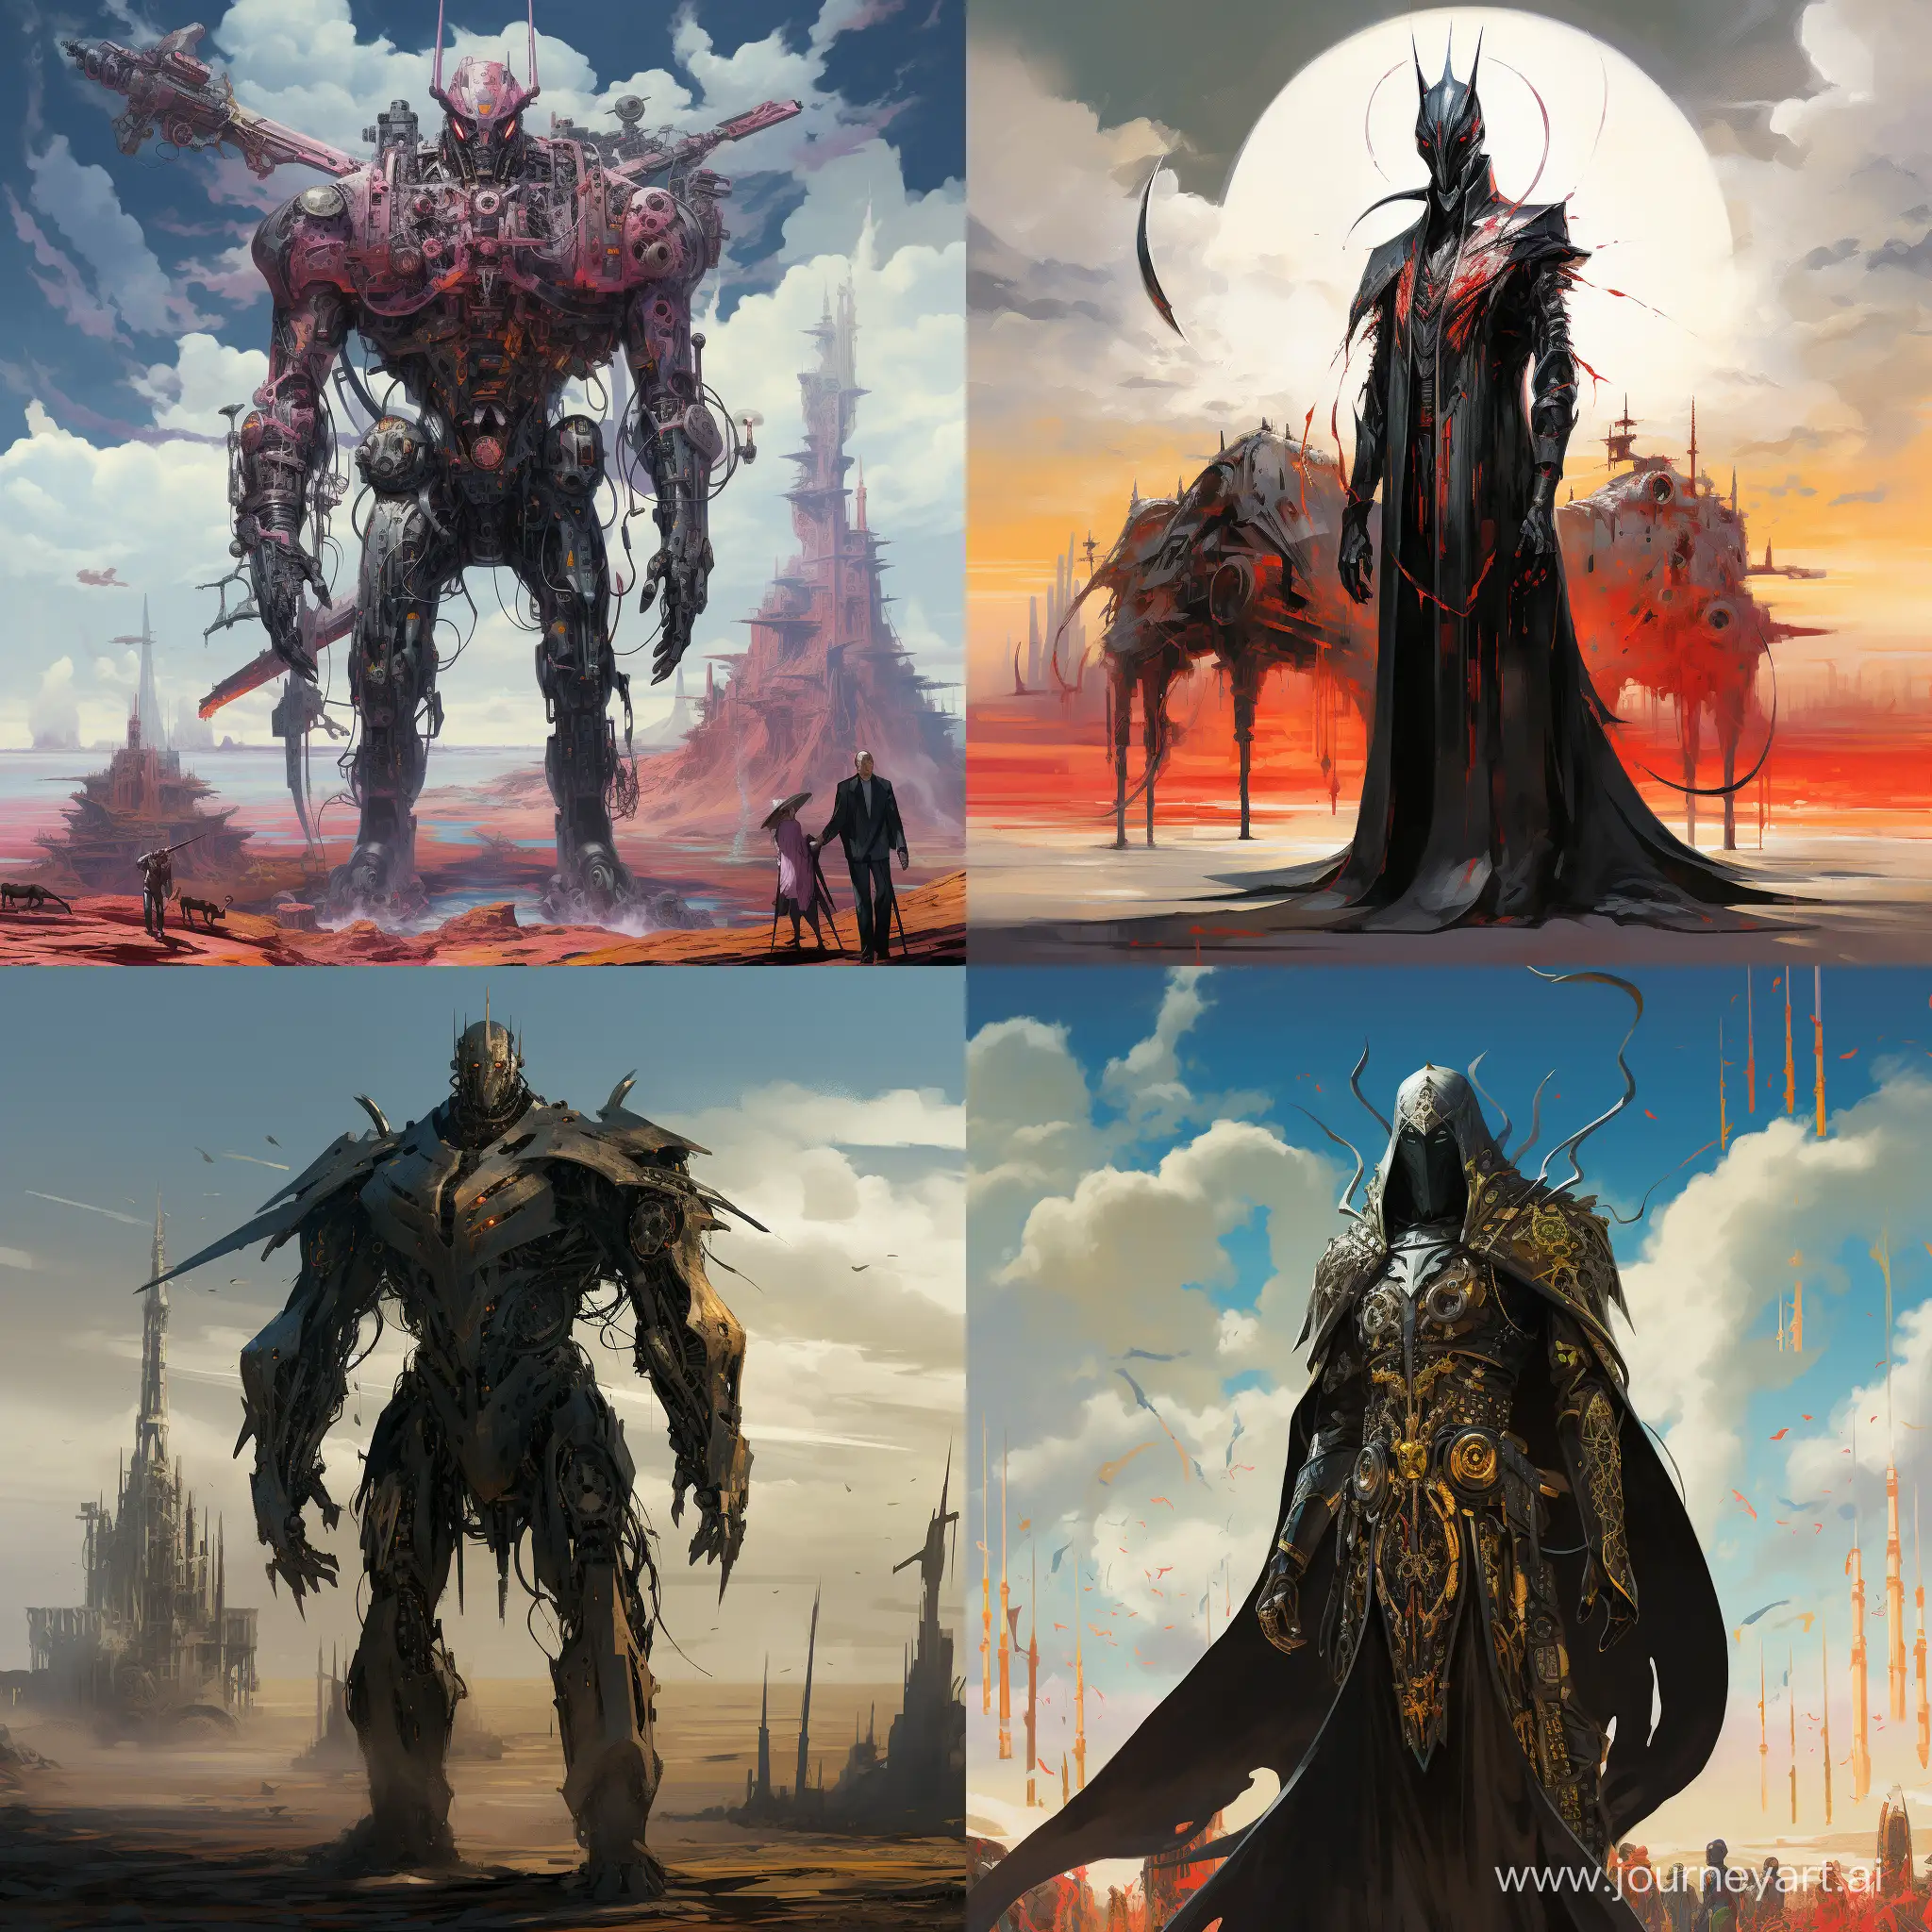 stands tall, ::1.1, The Black knight stands tall in interesting unusual armor , in cyberpunk::1.1 style, stands tall, explosion of color, abstraction, unusual